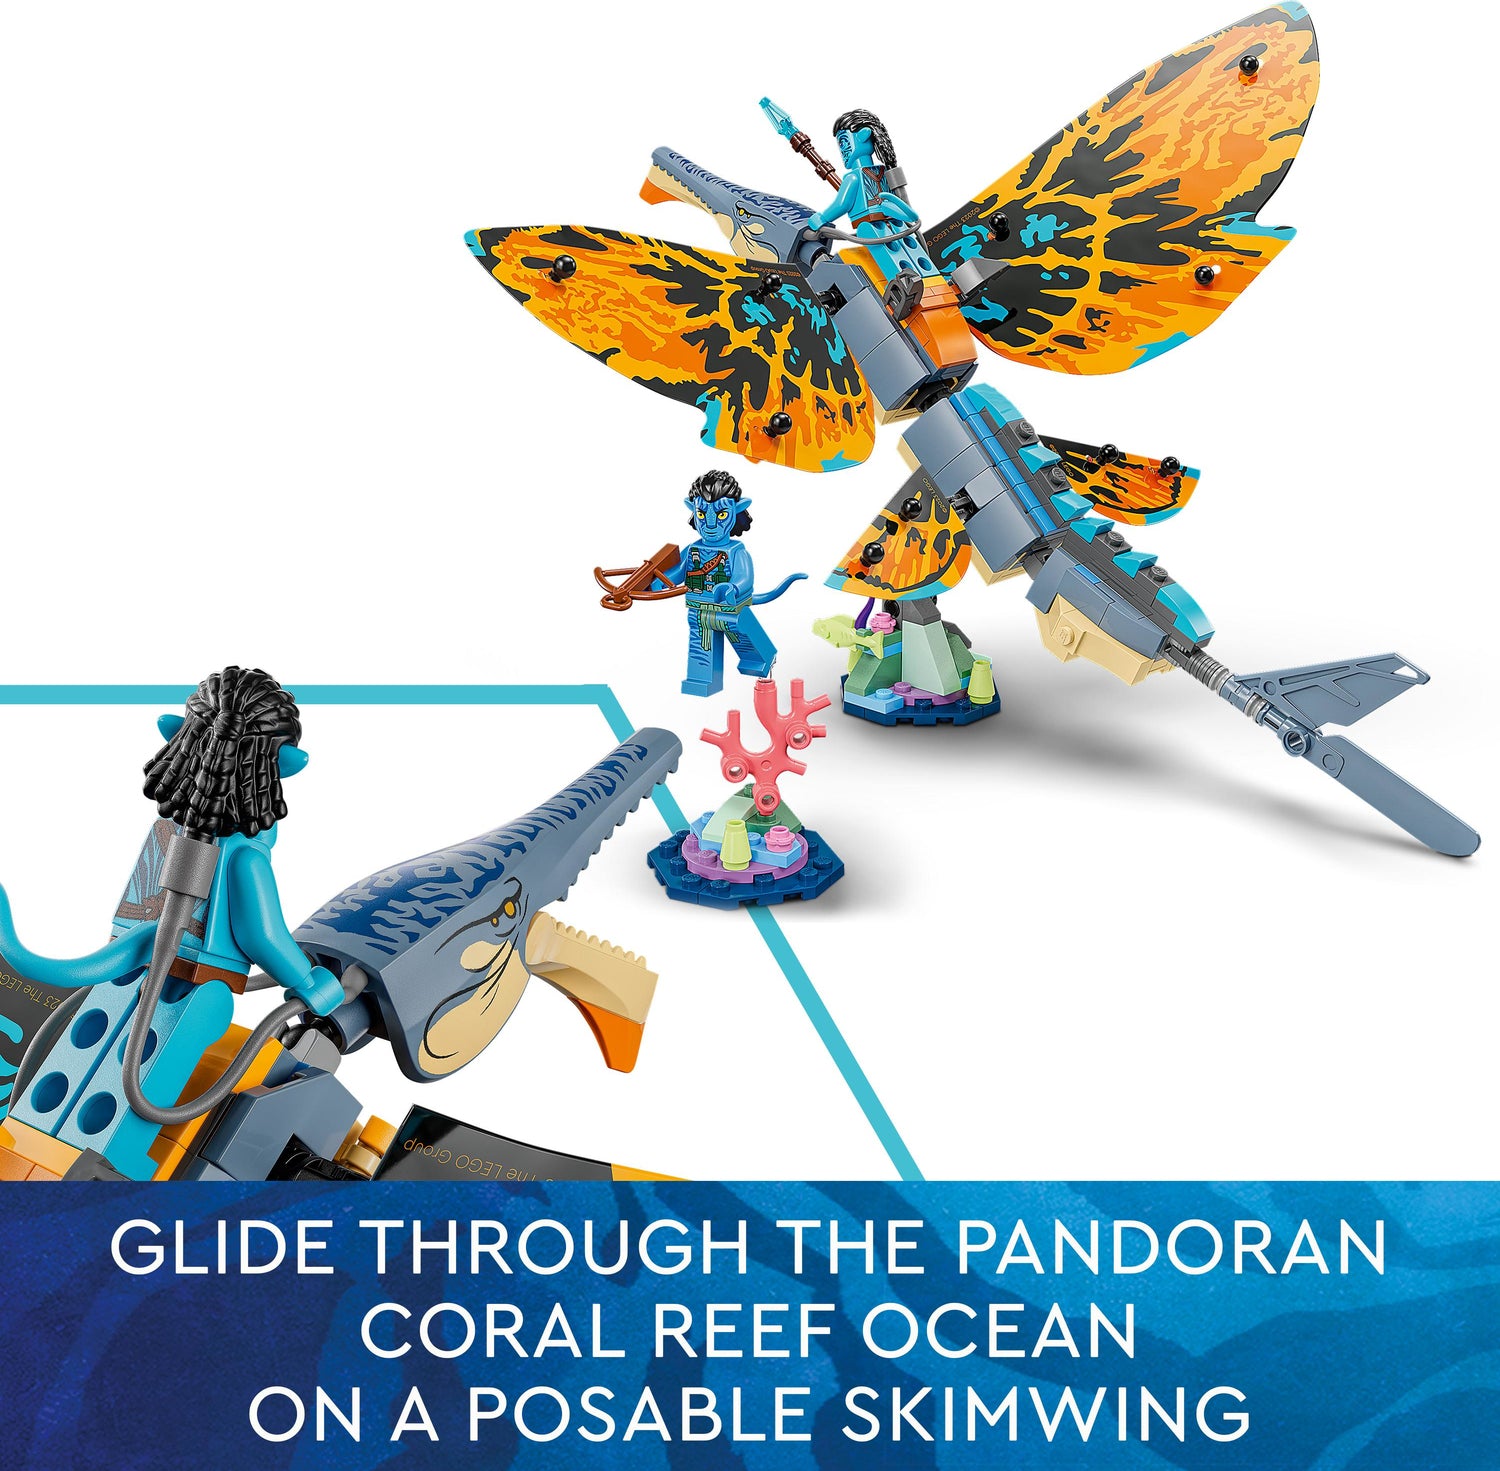 LEGO Avatar: The Way of Water Skimwing Adventure 75576 Collectible Set with  Toy Animal for Boys & Girls, Pandora Coral Reef Scene, Jake Sully and  Tonowari Minifigures